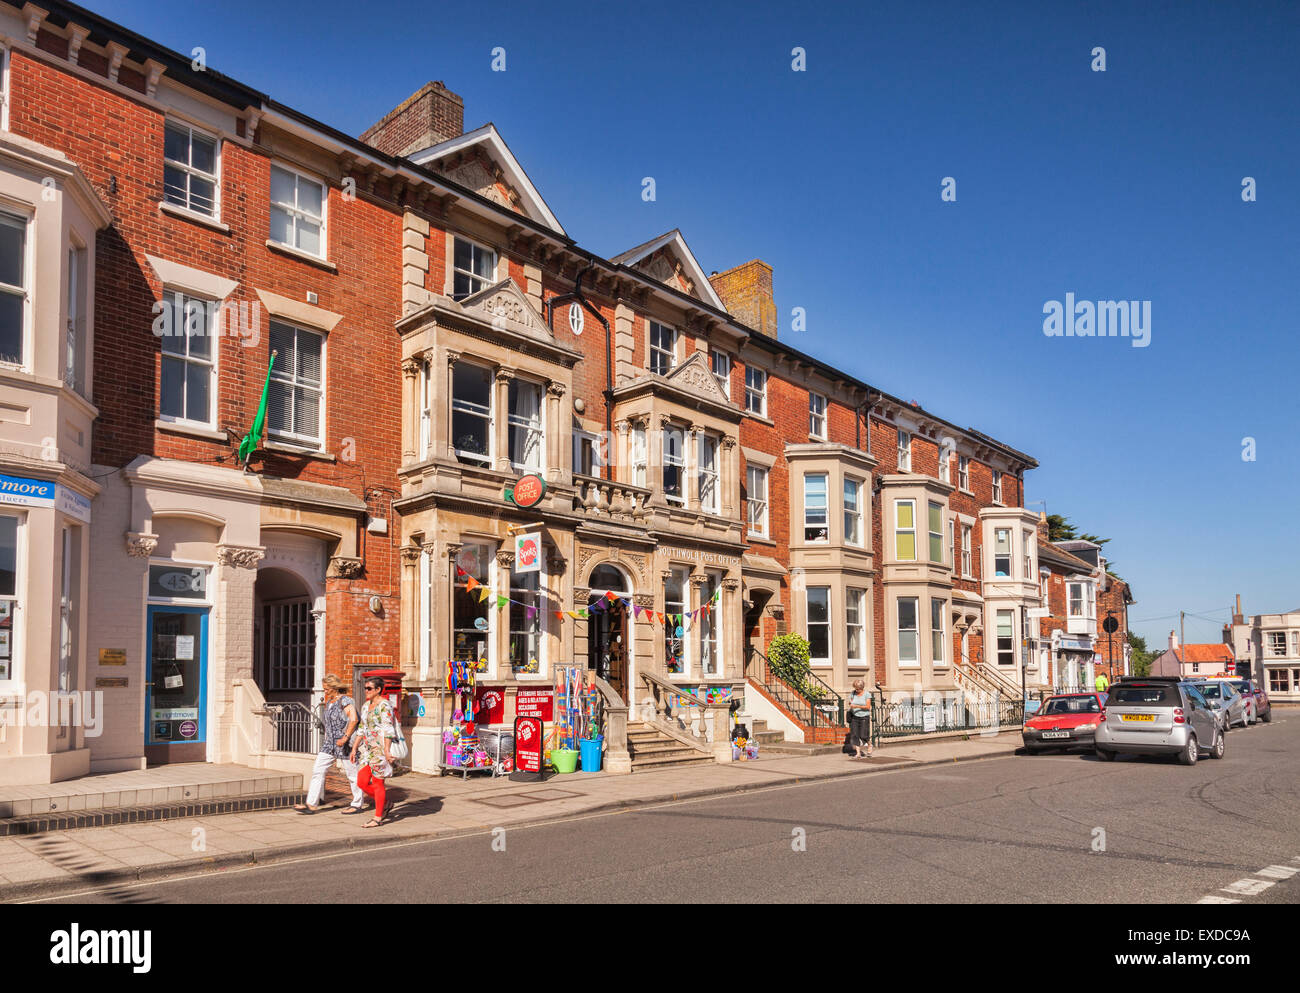 A sunny summer day in the High Street, Southwold, Suffolk, England. Stock Photo